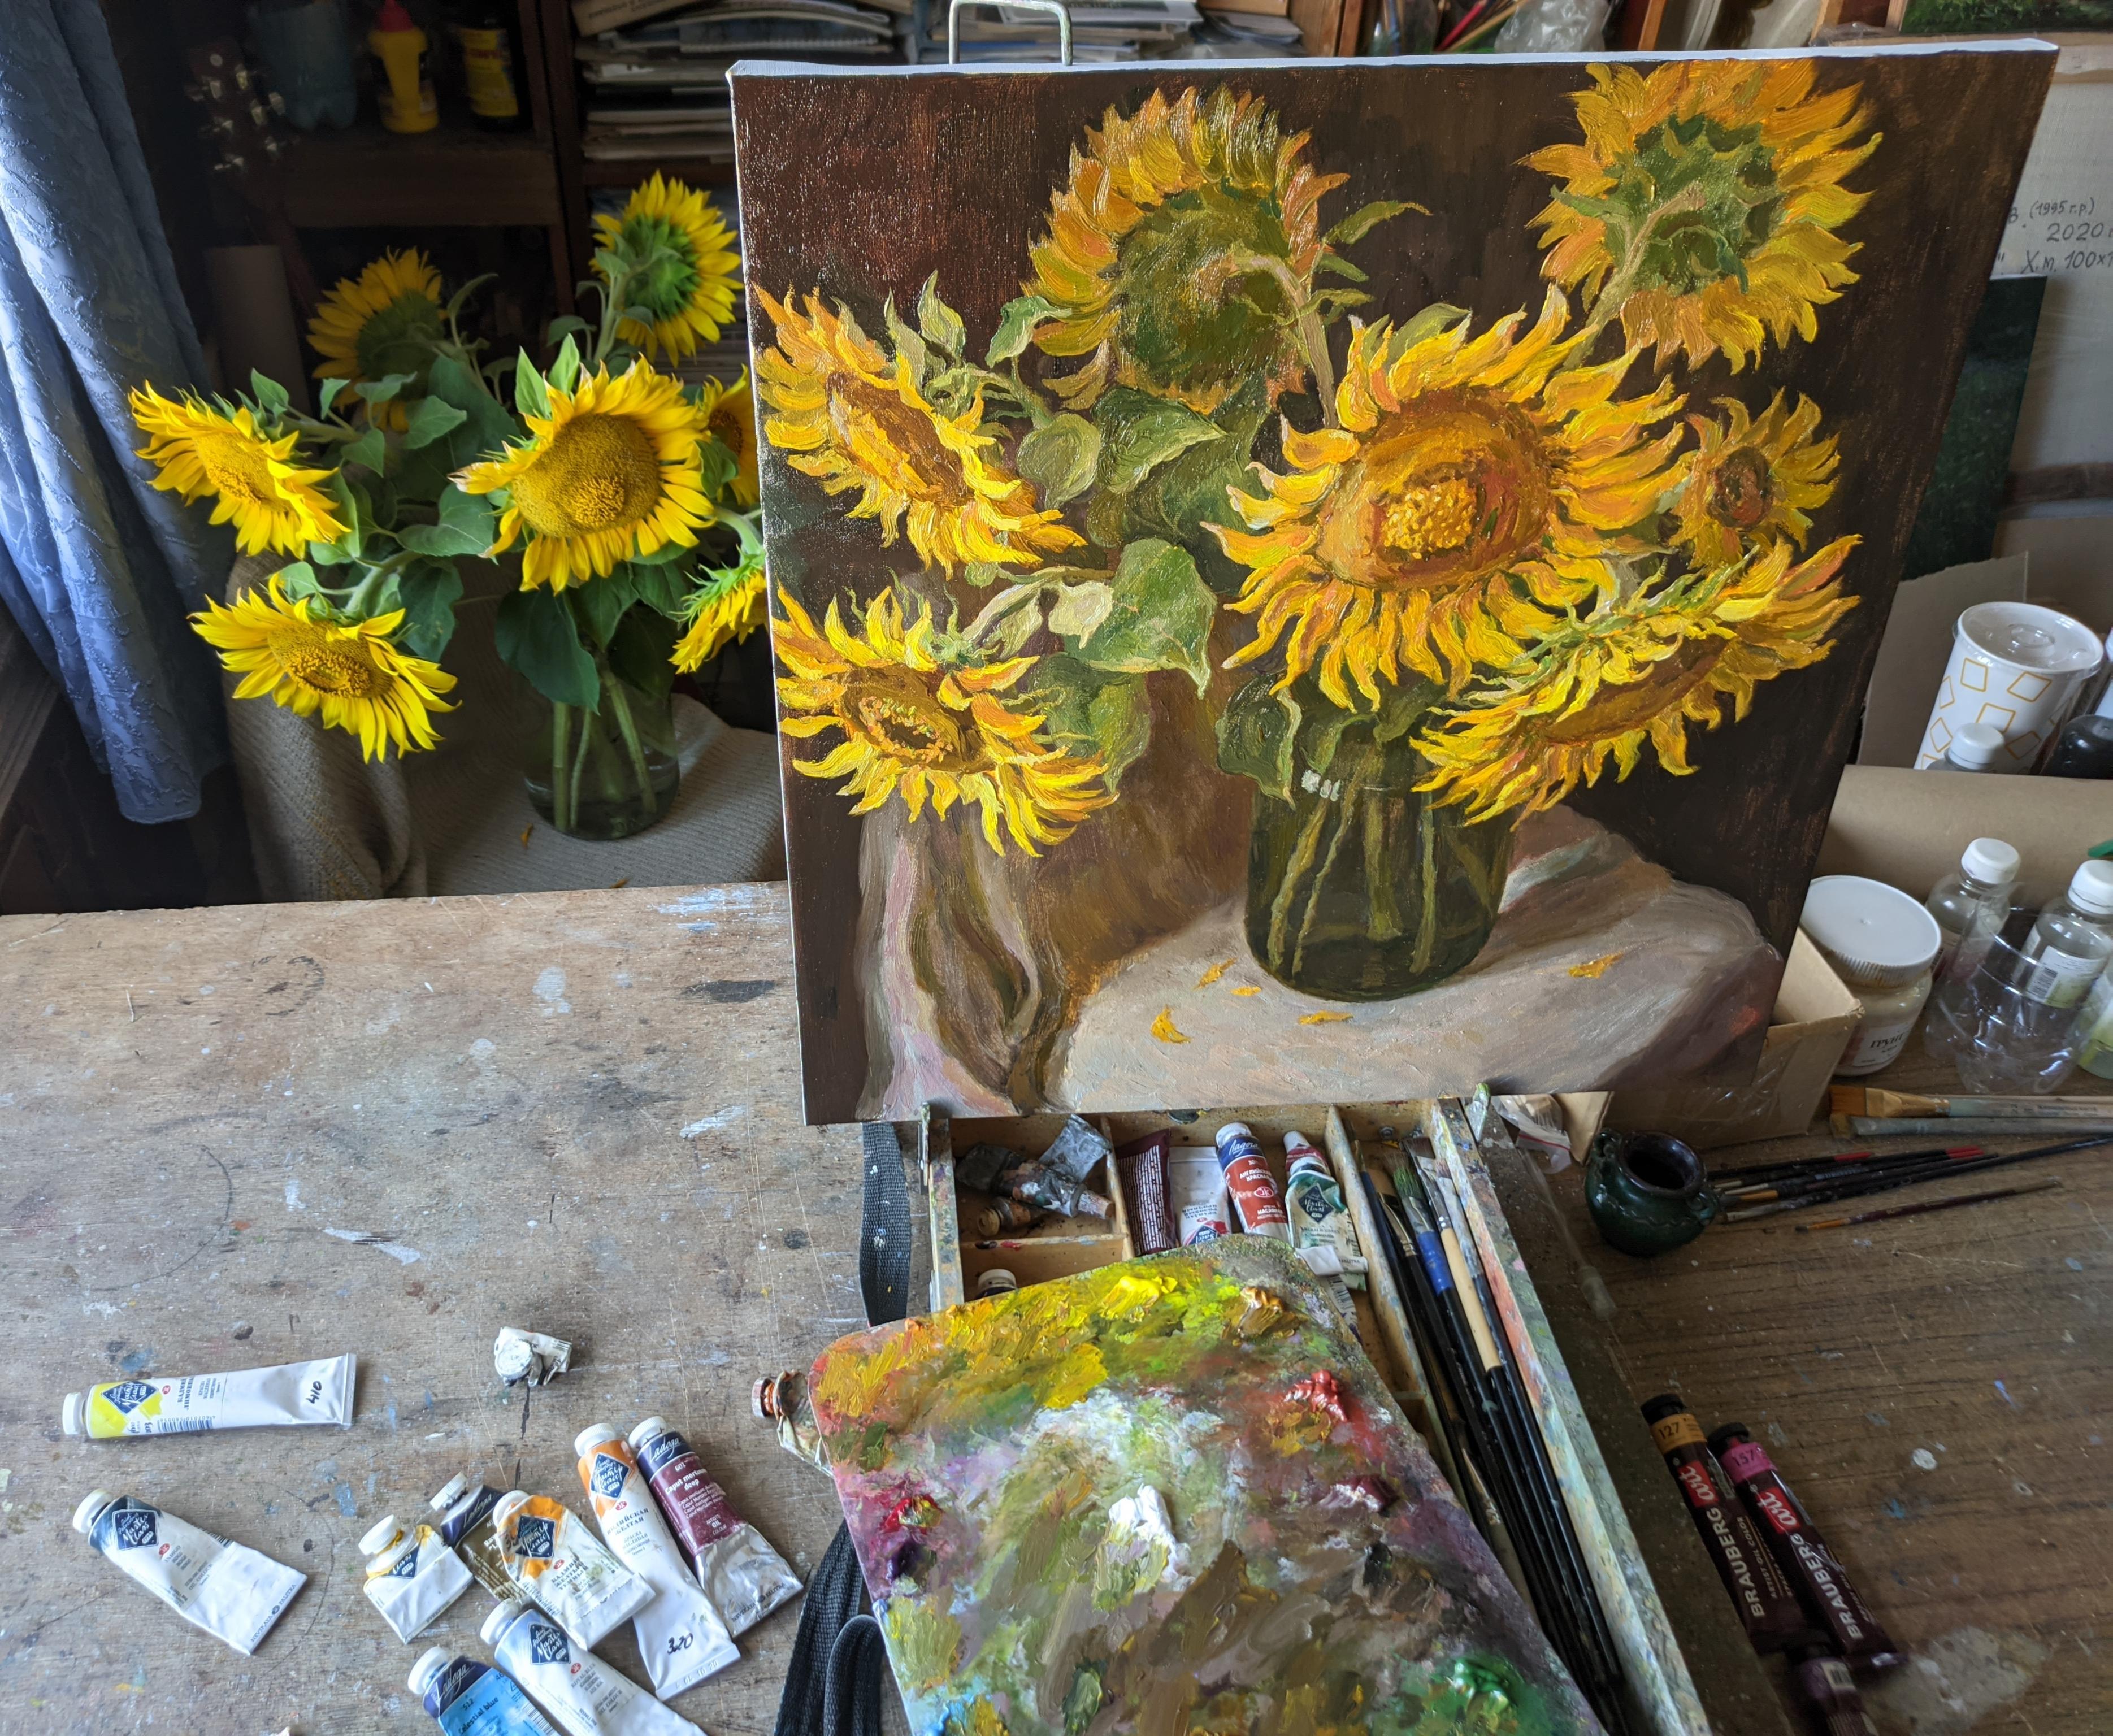 The Bouquet Of Sunflowers - sunflower still life painting For Sale 5